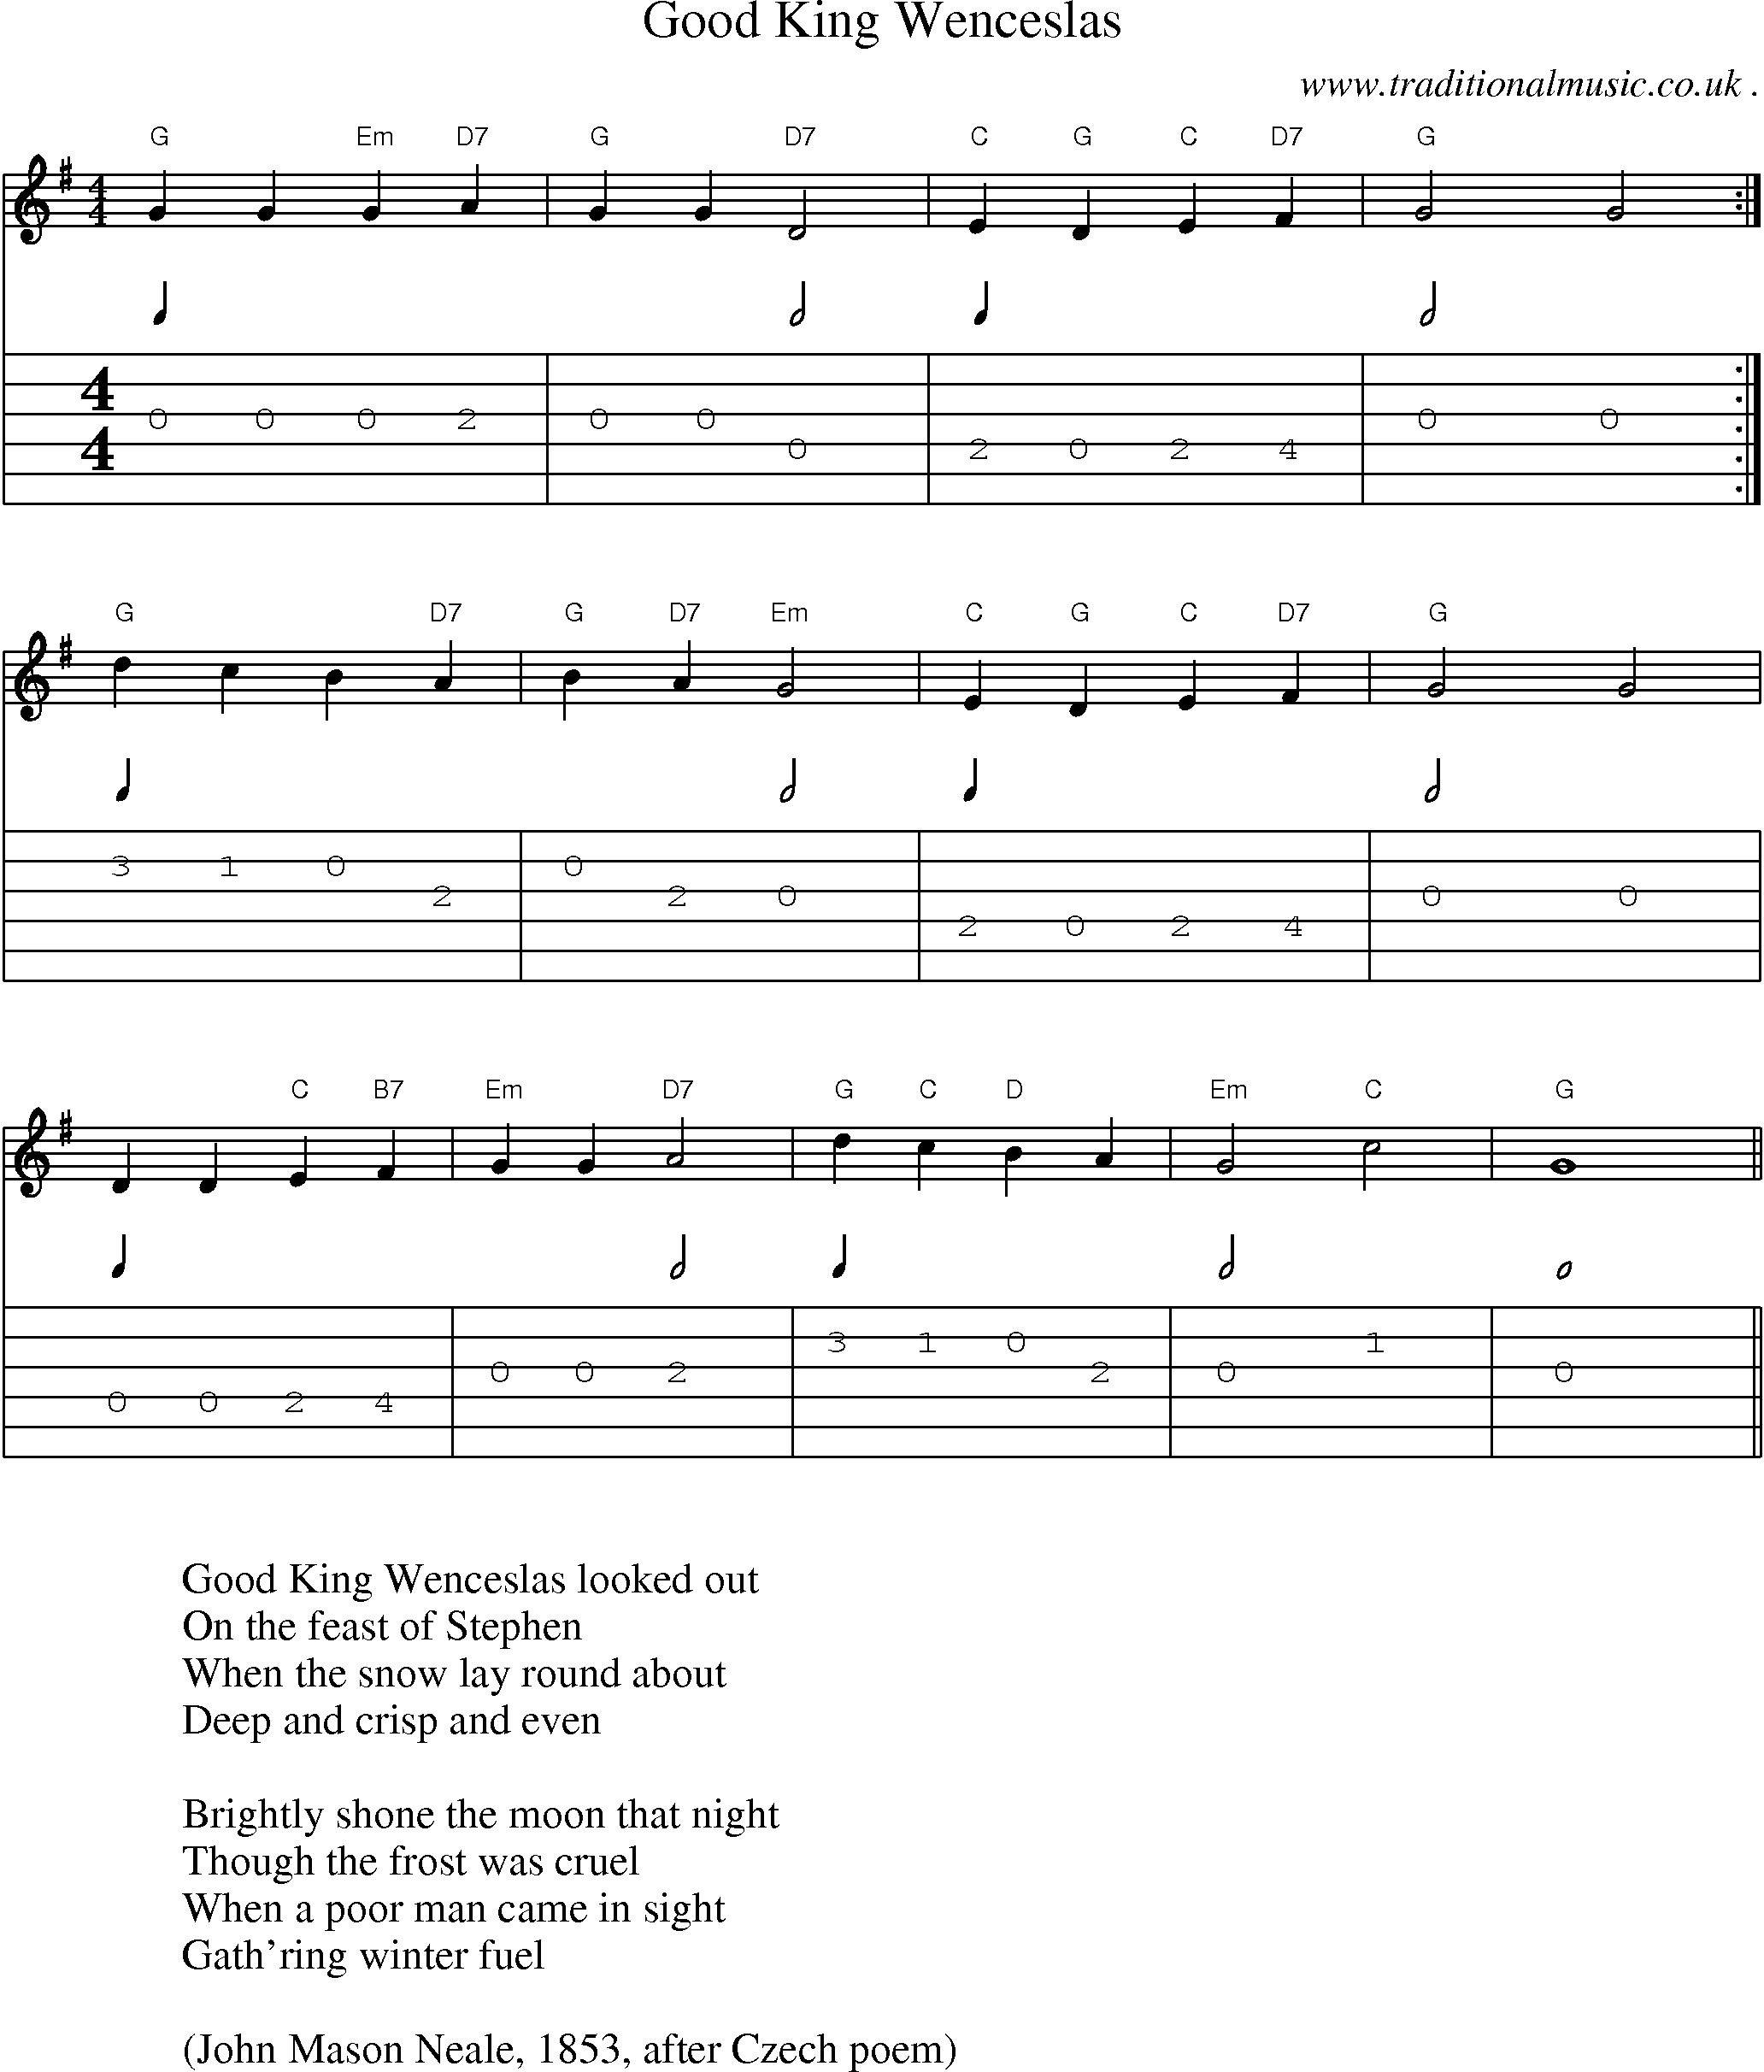 Music Score and Guitar Tabs for Good King Wenceslas